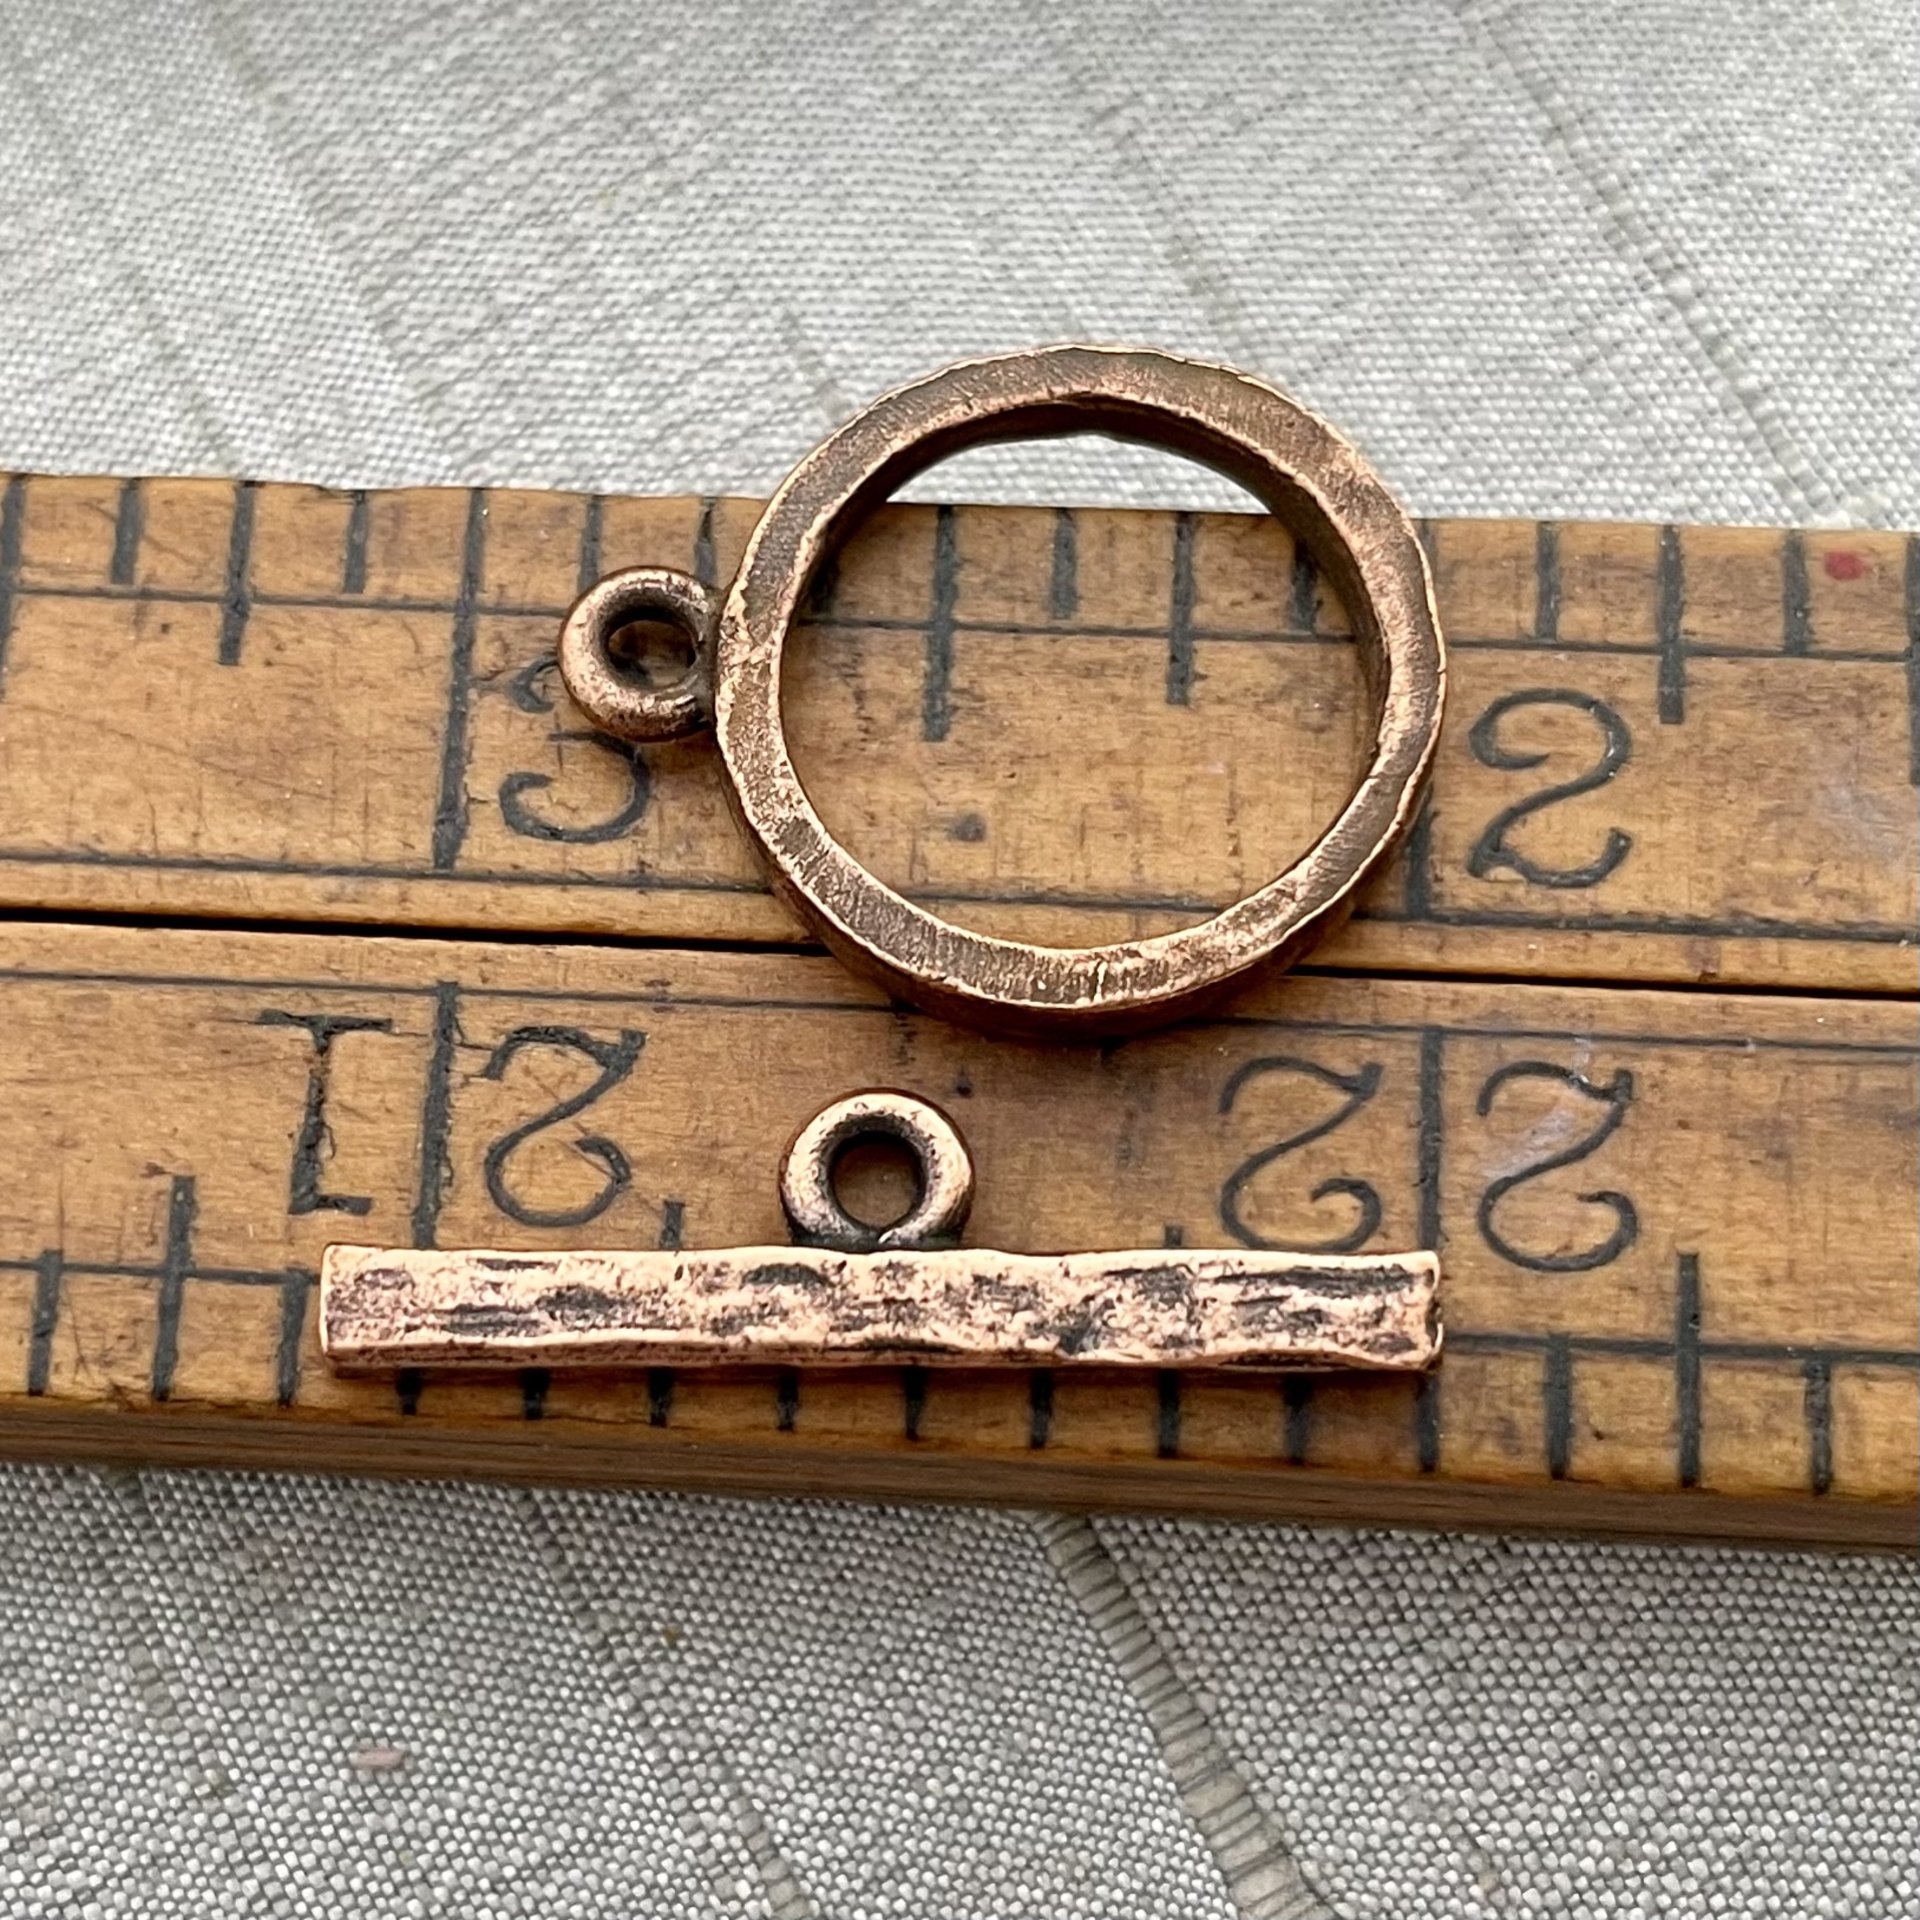 Hammered Toggle Antique Copper